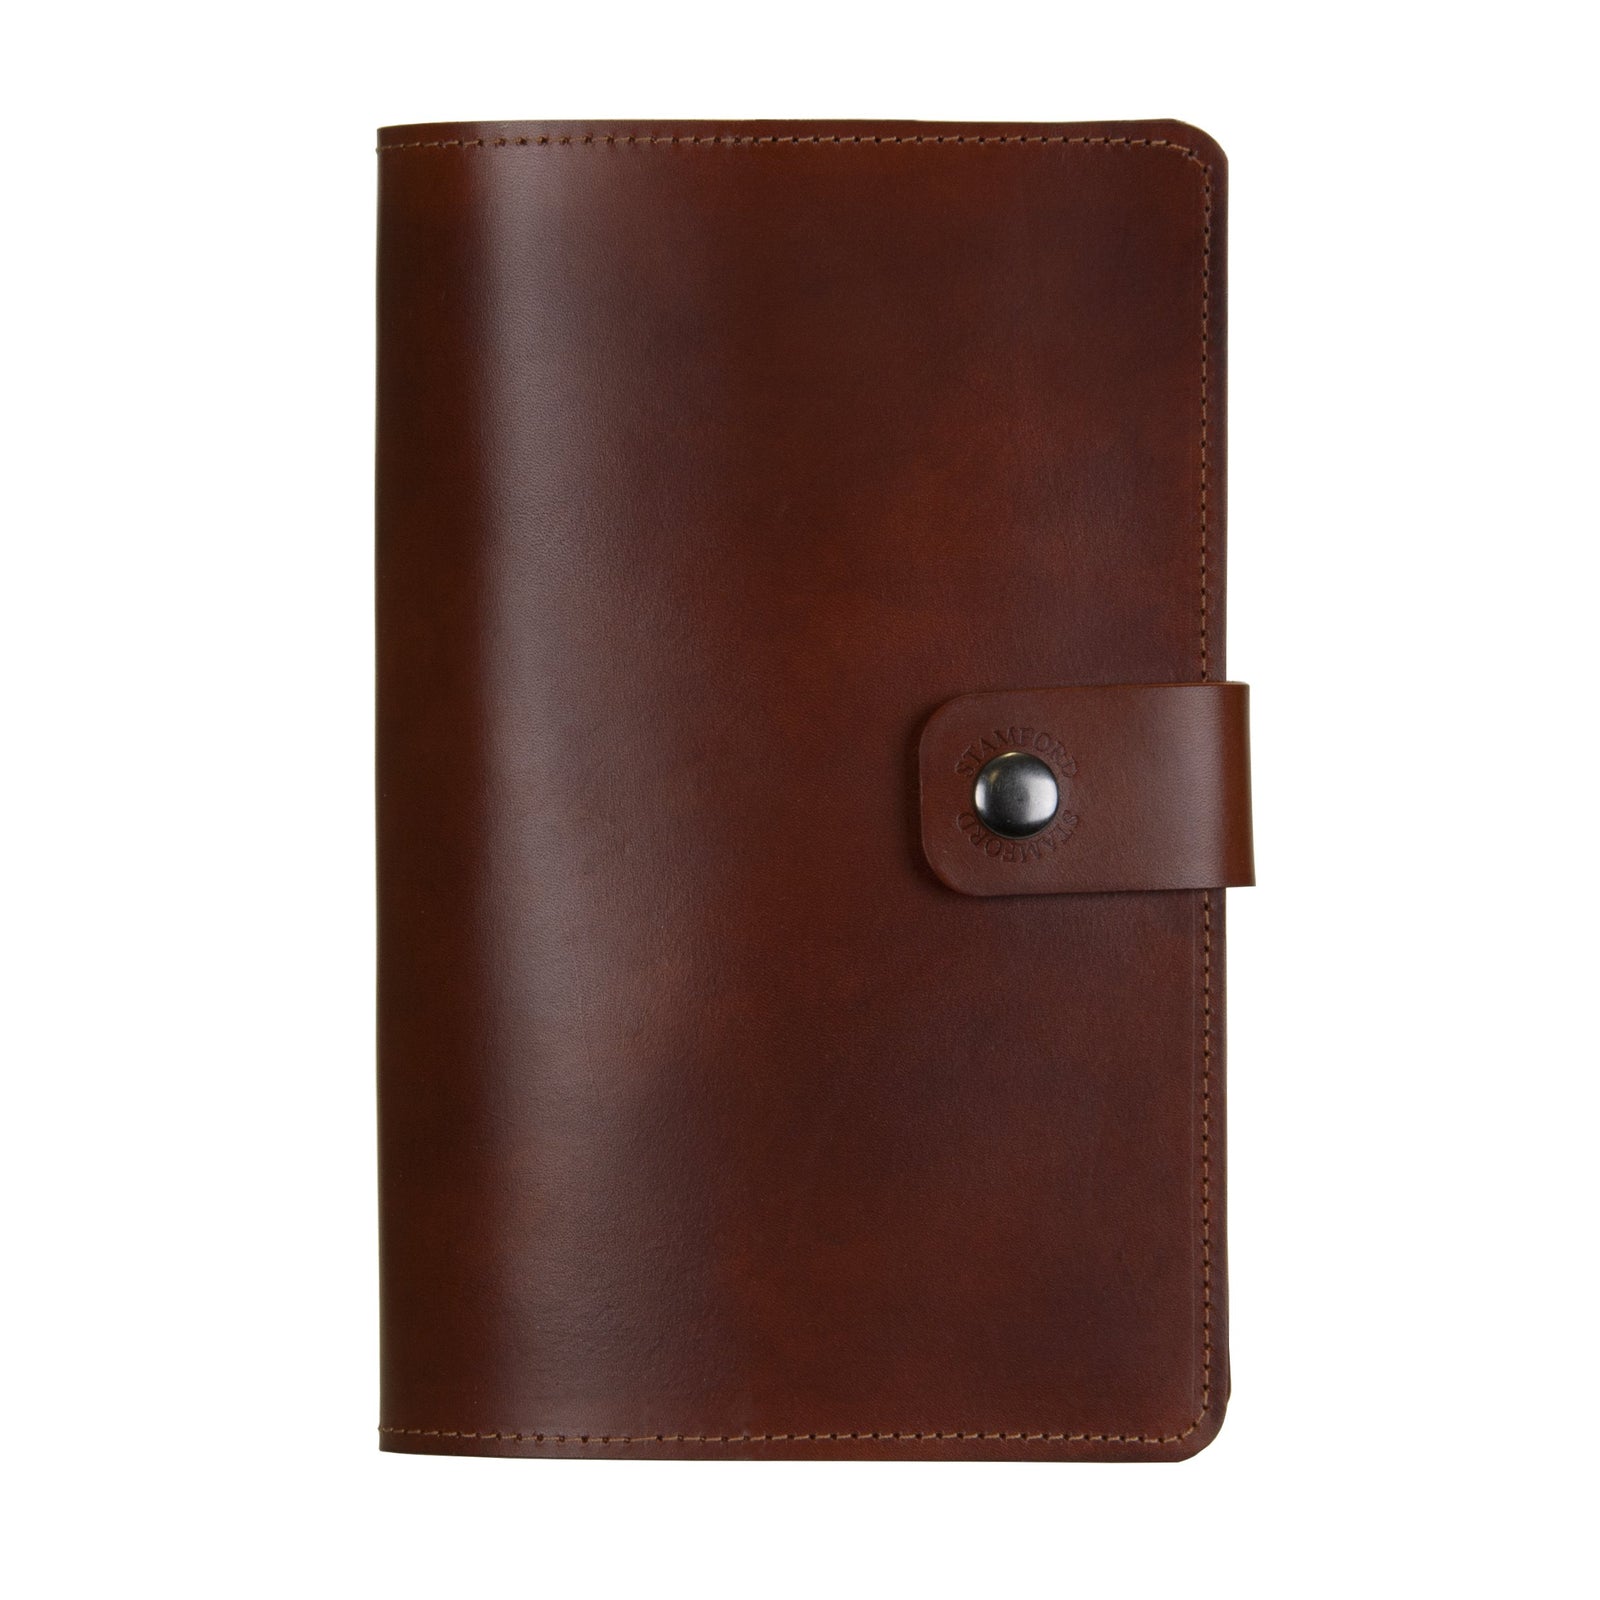 The Burghley Leather Organiser